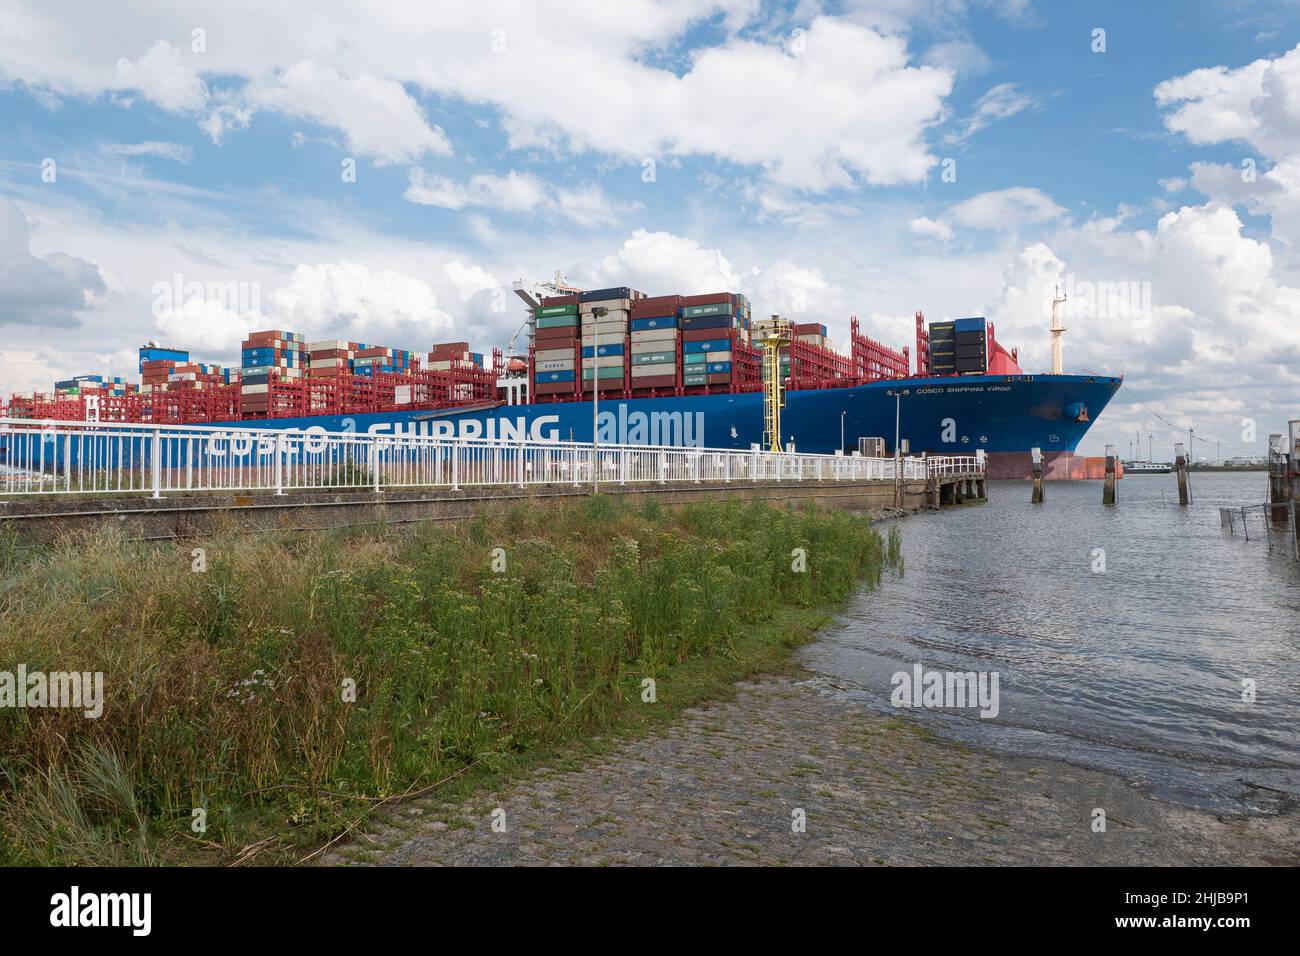 Doel, Belgium, August 17, 2020, The container ship Cosco Shipping from Hong Kong, sails very close to the pier of the polder village of Doel in Belgiu Stock Photo